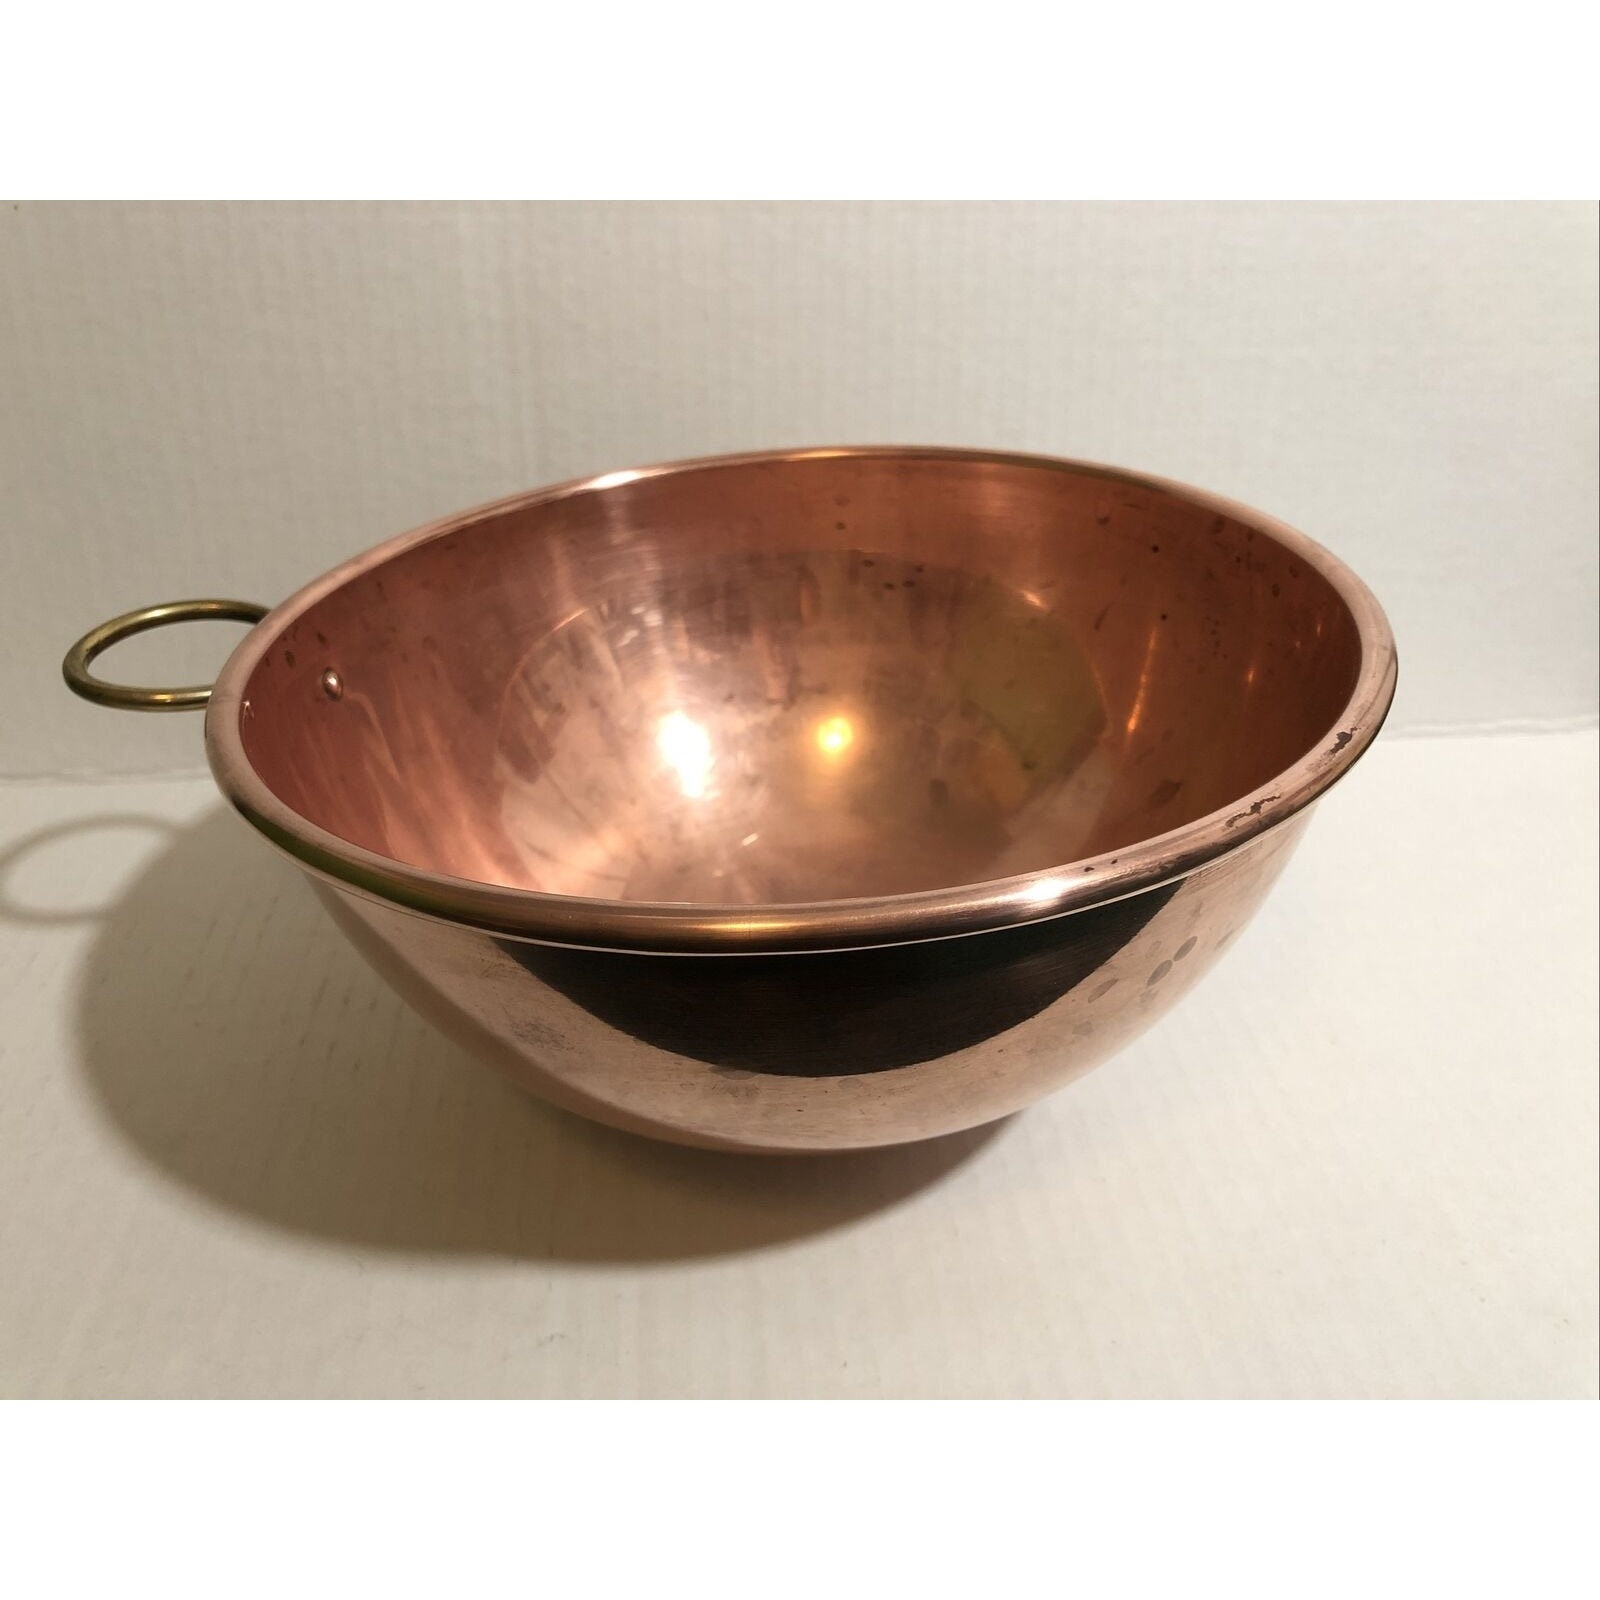 Sold at Auction: Set of Five English Copper Mixing Bowls